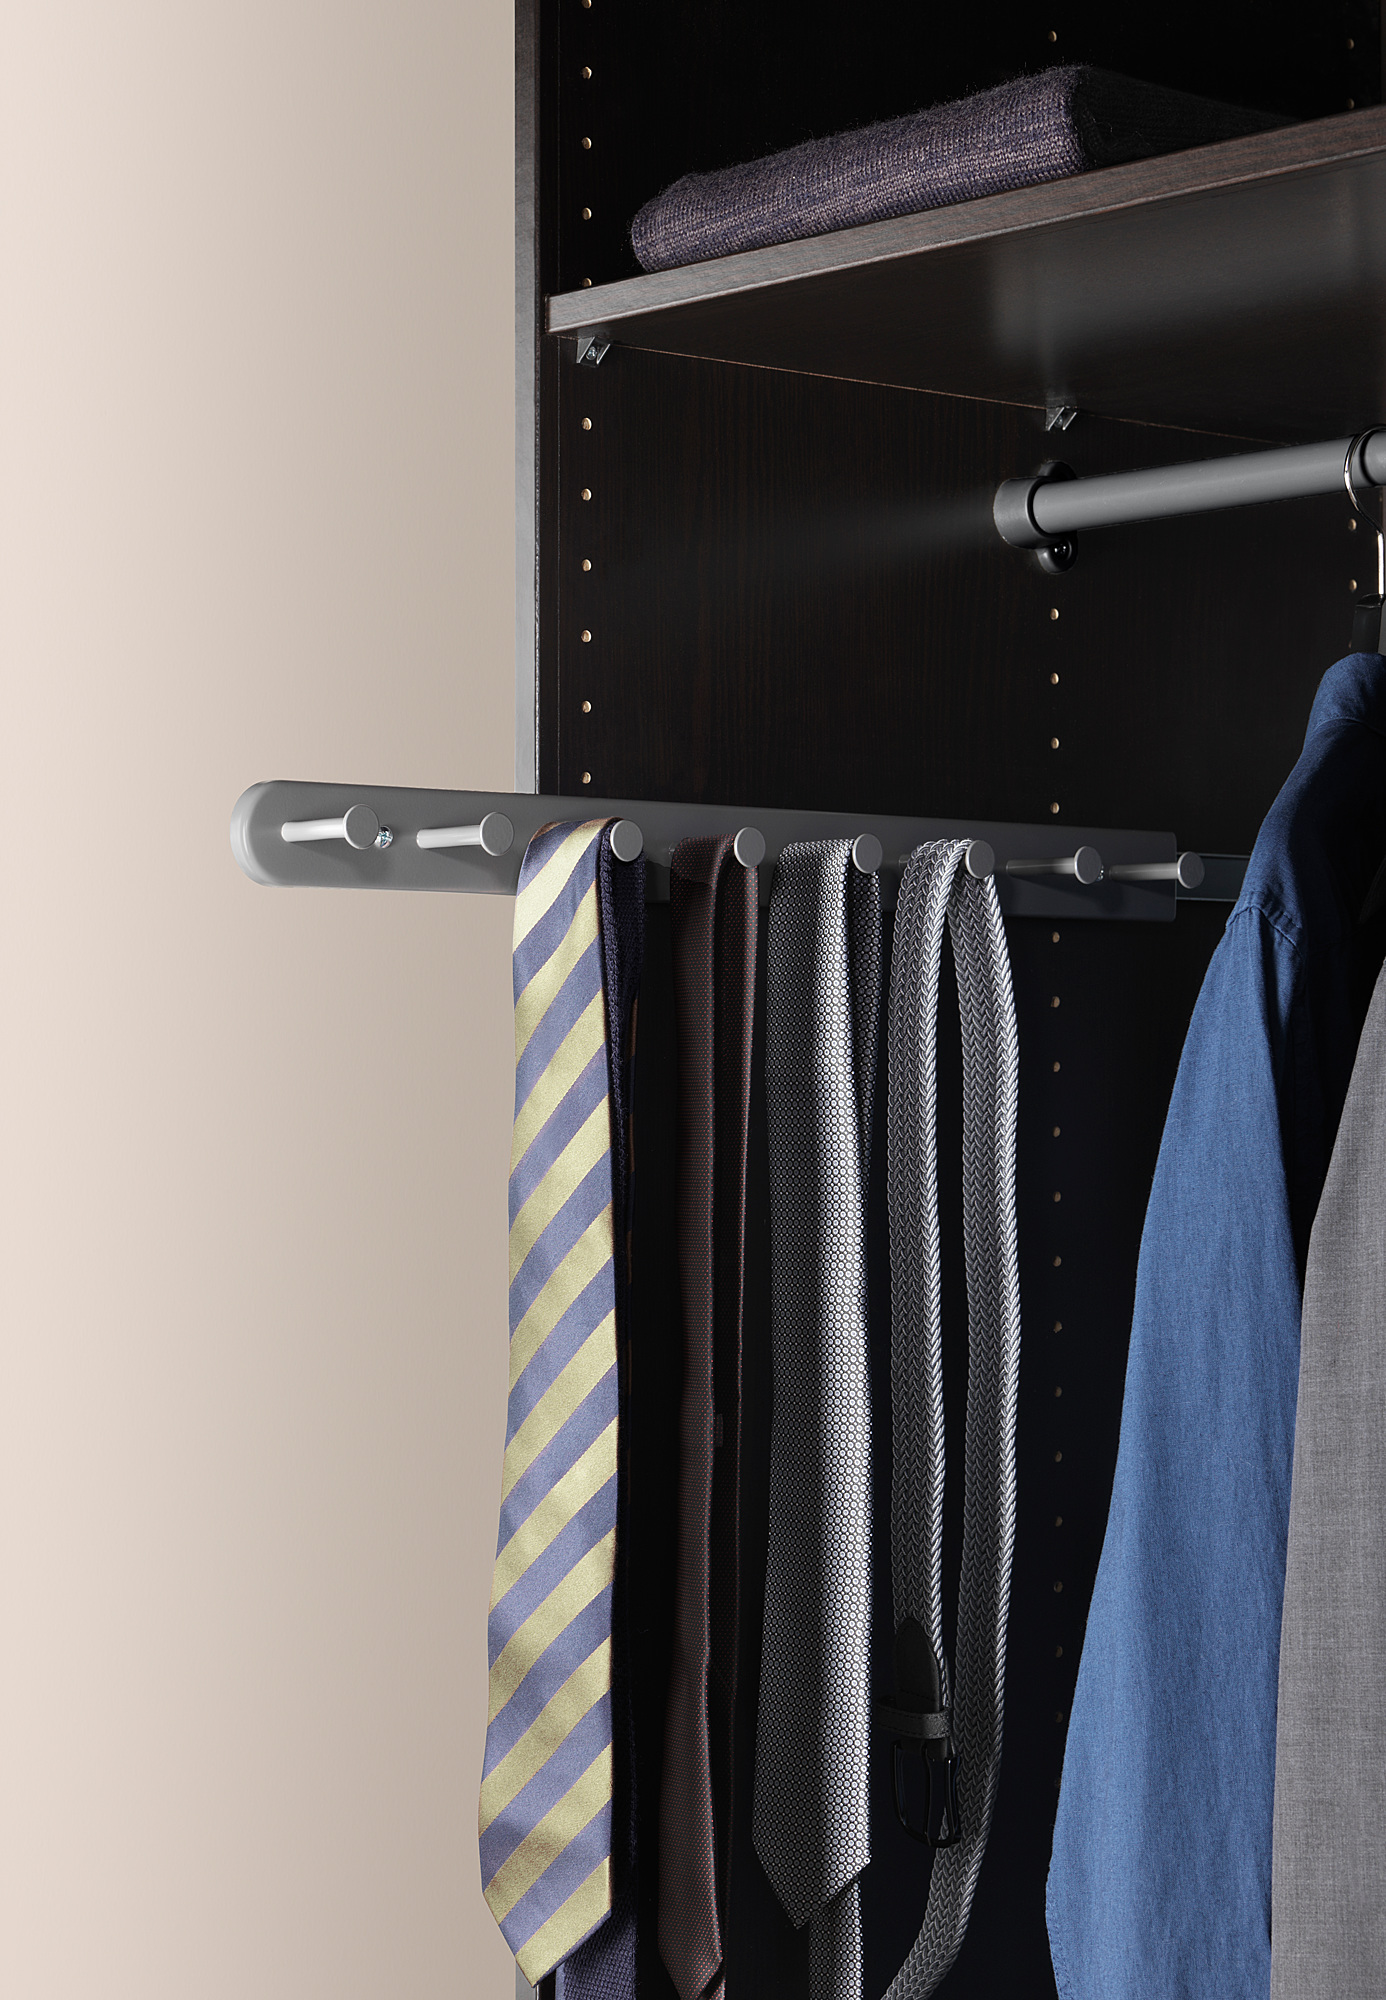 KOMPLEMENT pull-out multi-use hanger